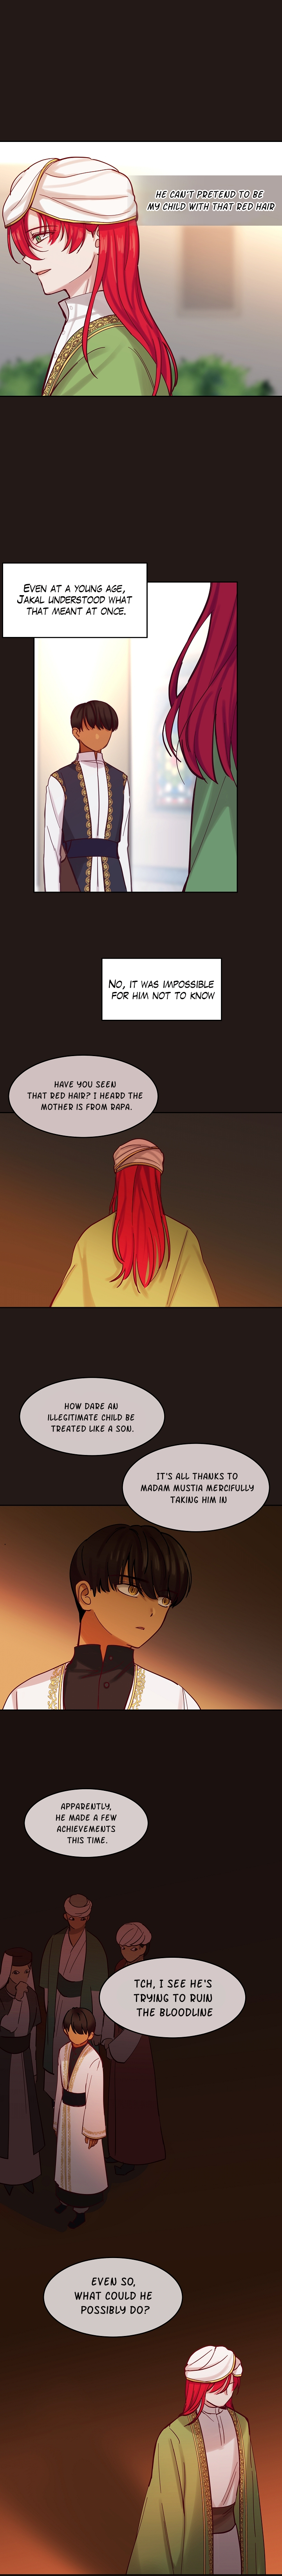 Amina Of The Lamp - Page 2